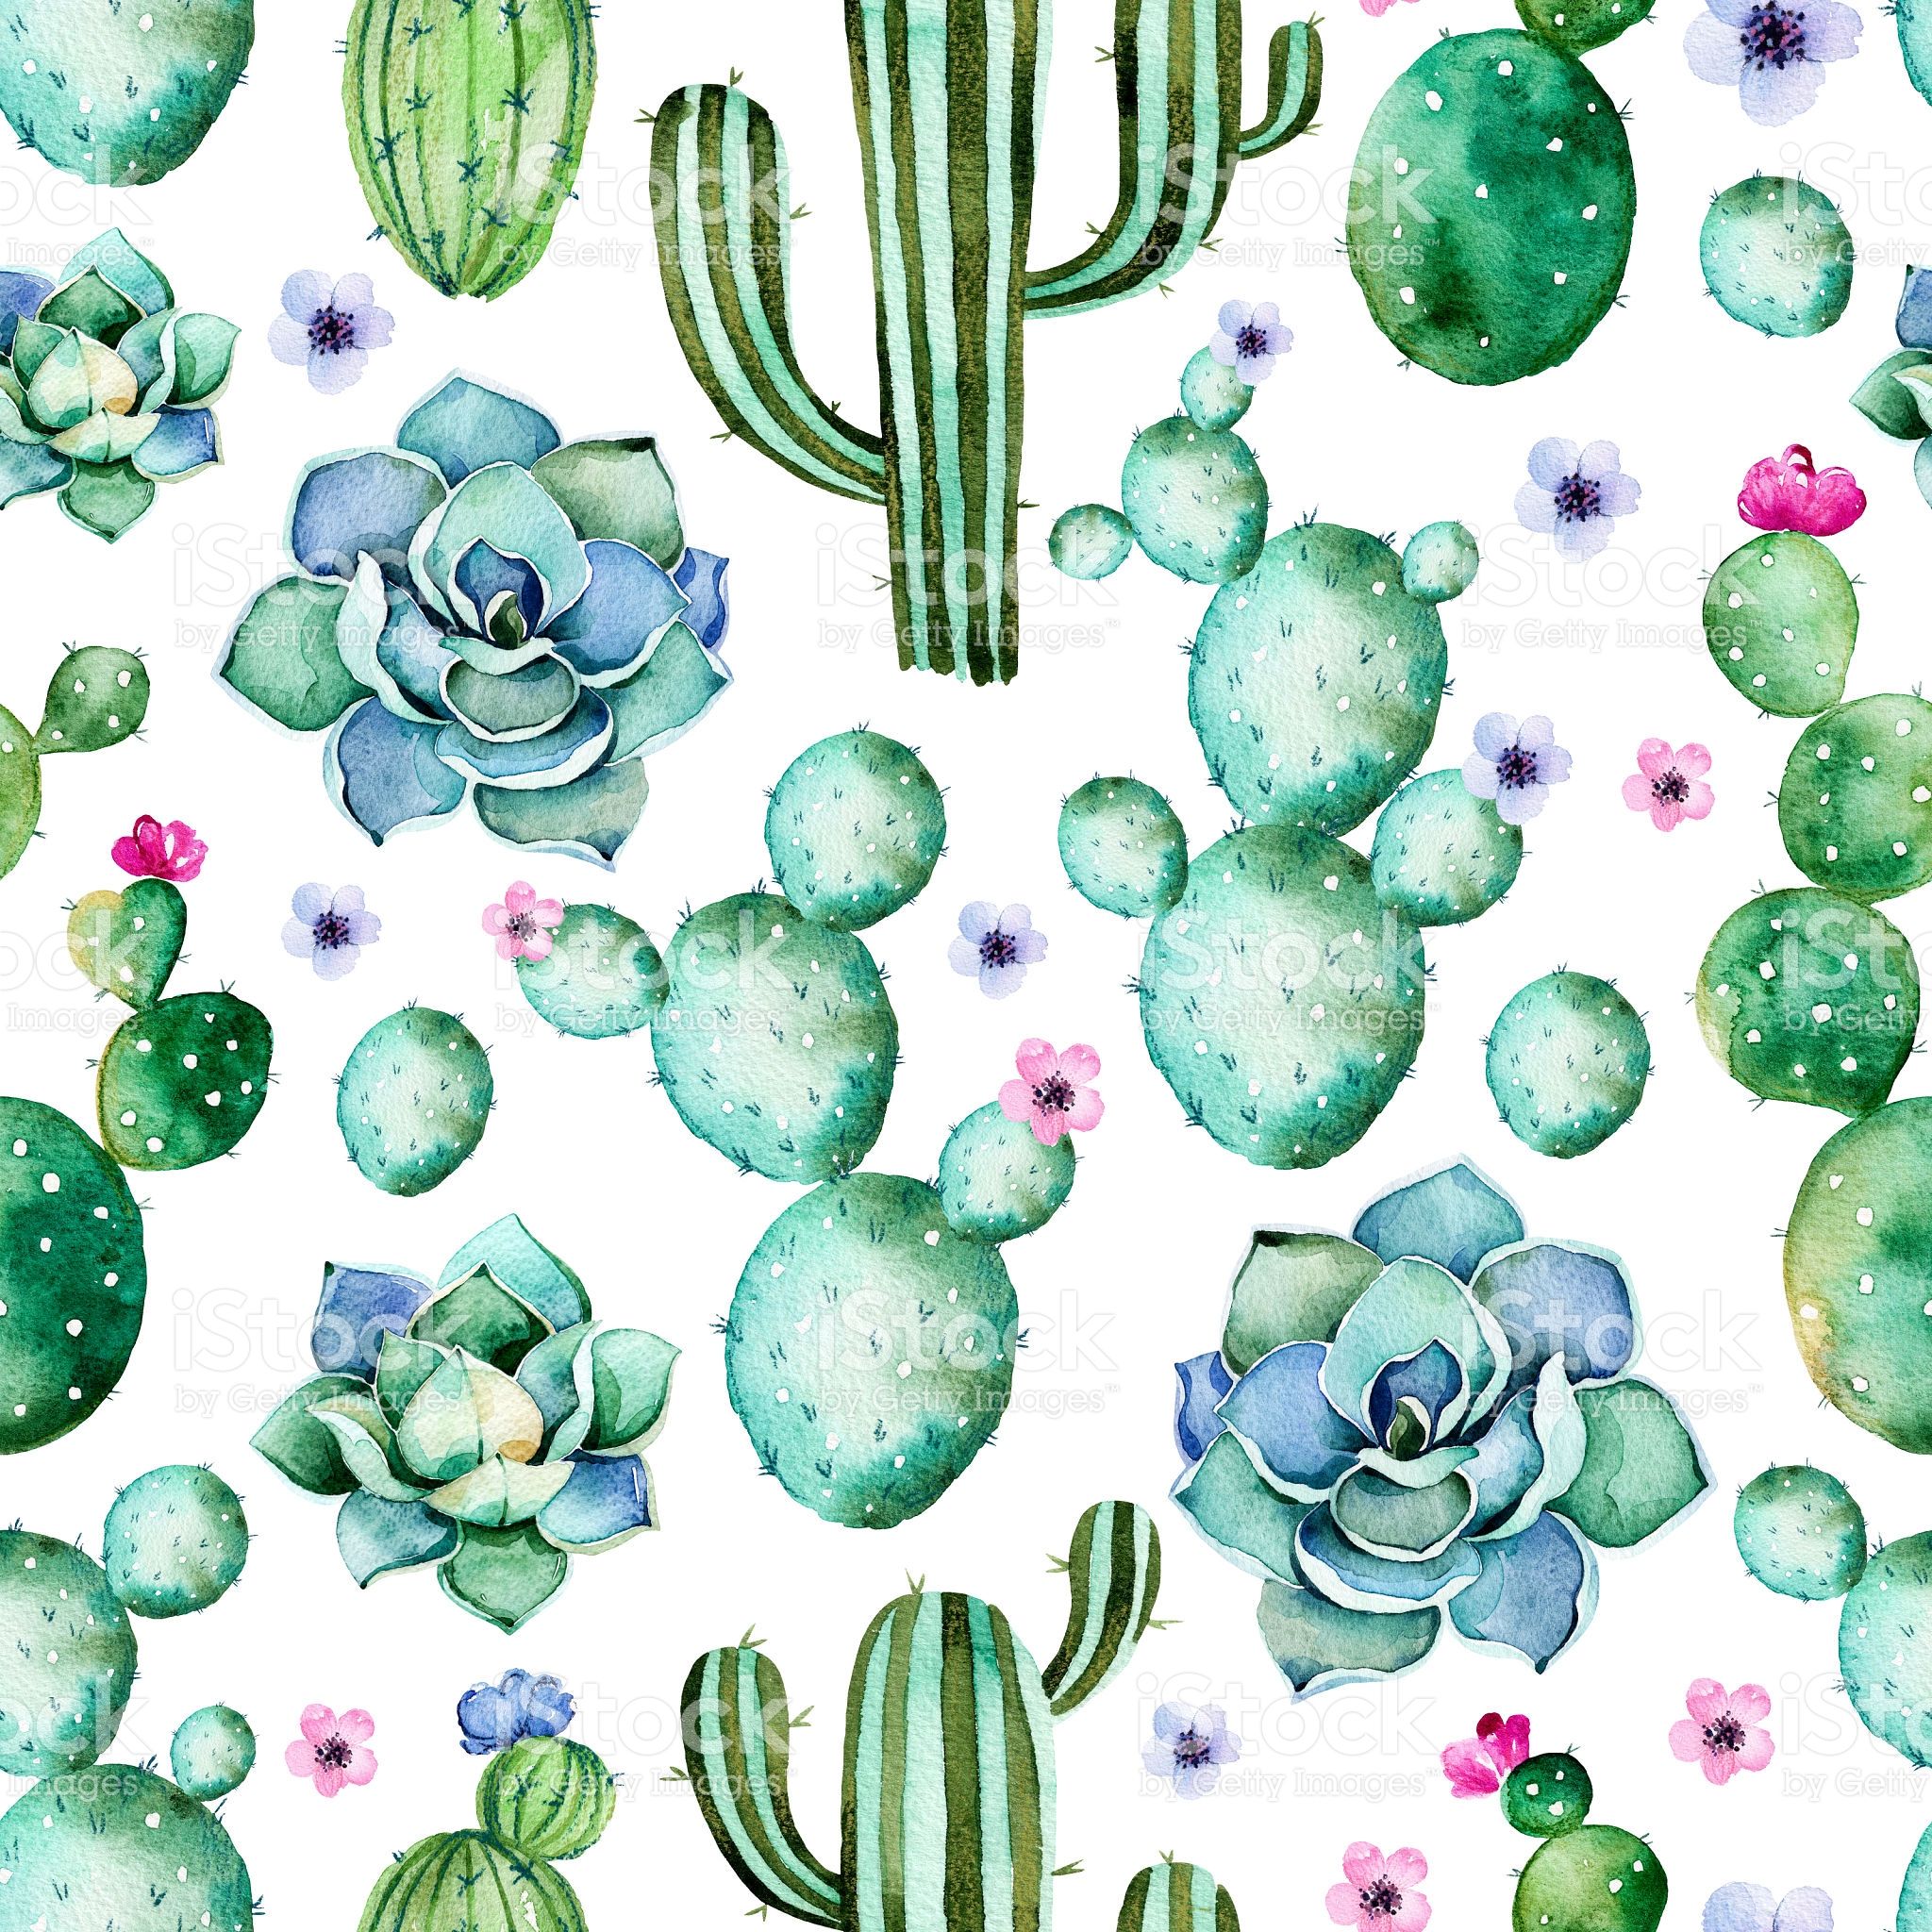 Seamless Pattern With Watercolor Cactus Plants, Succulents Royalty Free Seamless Pattern With Watercolor Cac. Succulents Wallpaper, Watercolor Cactus, Cactus Print